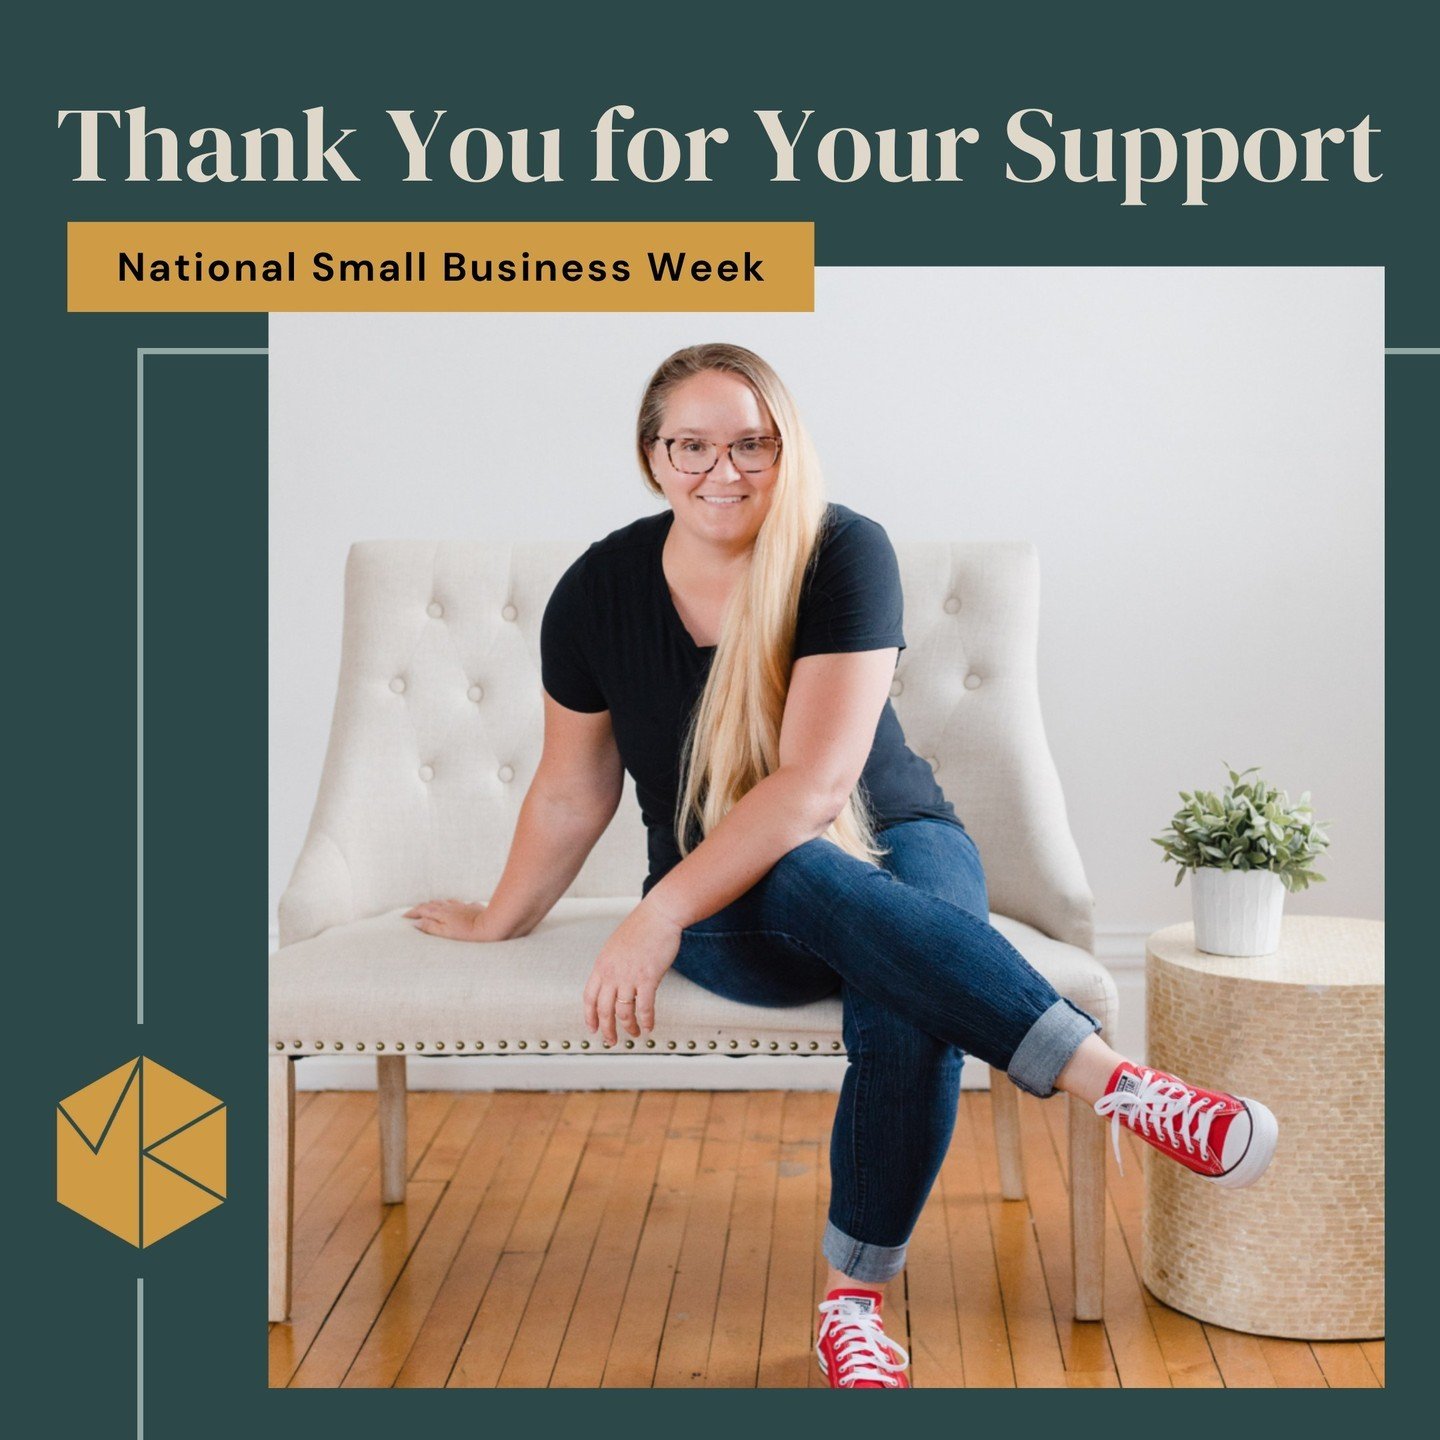 Small but mighty! From one small business owner to another &ndash; here's to resilience, creativity, and the pursuit of our passions.

#NationalSmallBusinessWeek #smallbusiness #smallbusinessowner #businessowner #philadelphiaphotographer #pennsylvani